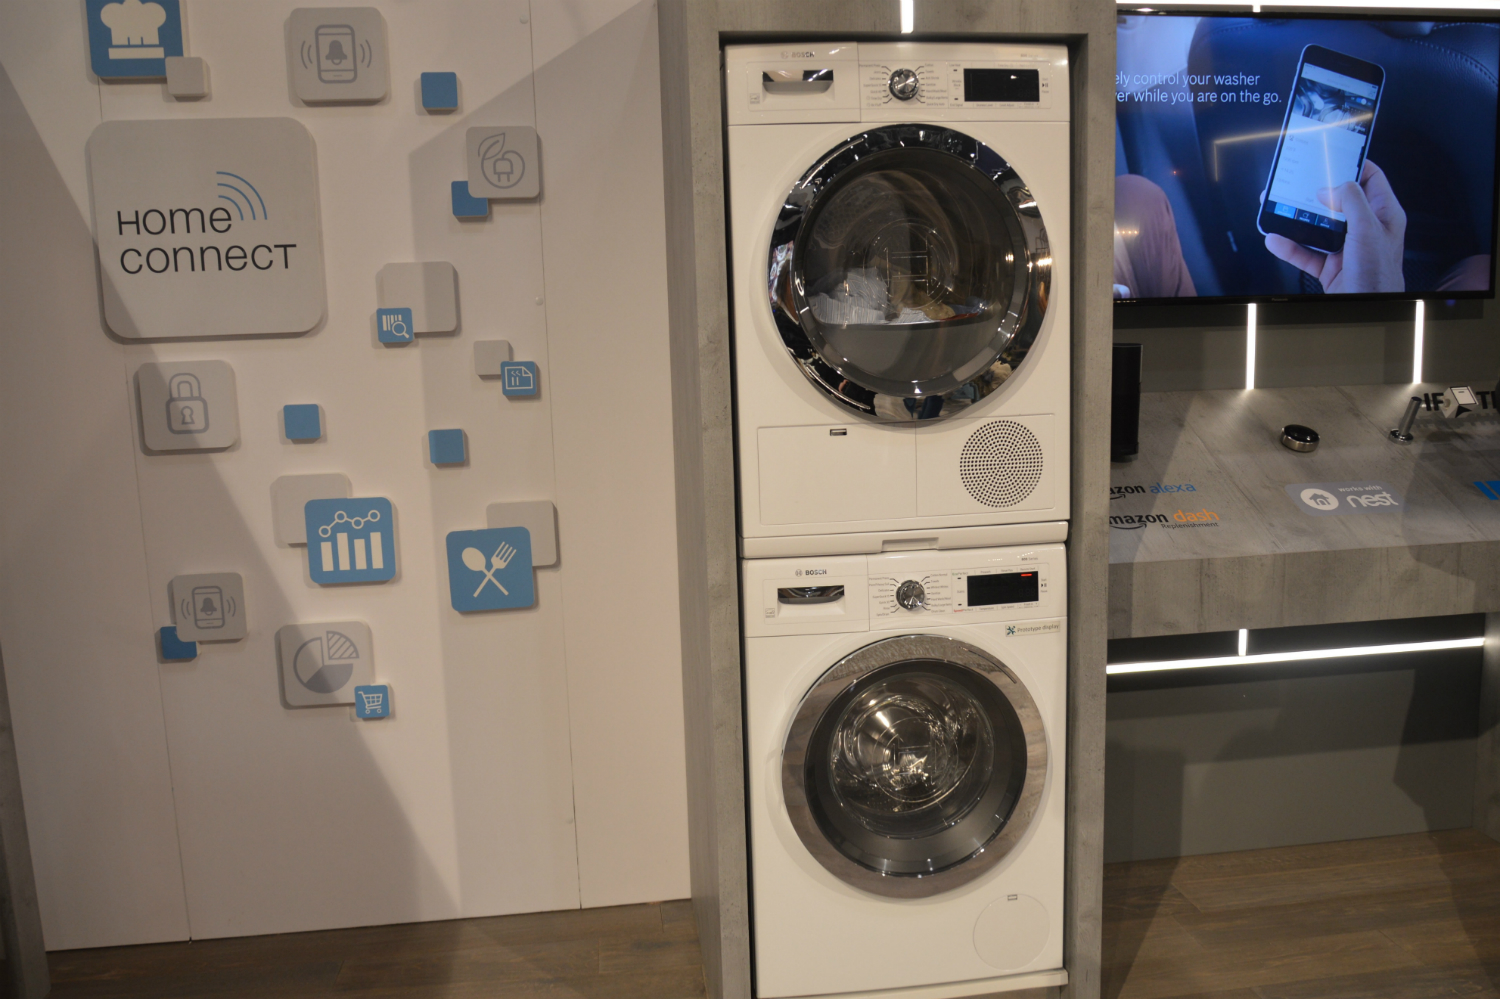 appliance trends kbis 2017 bosch home connect laundry